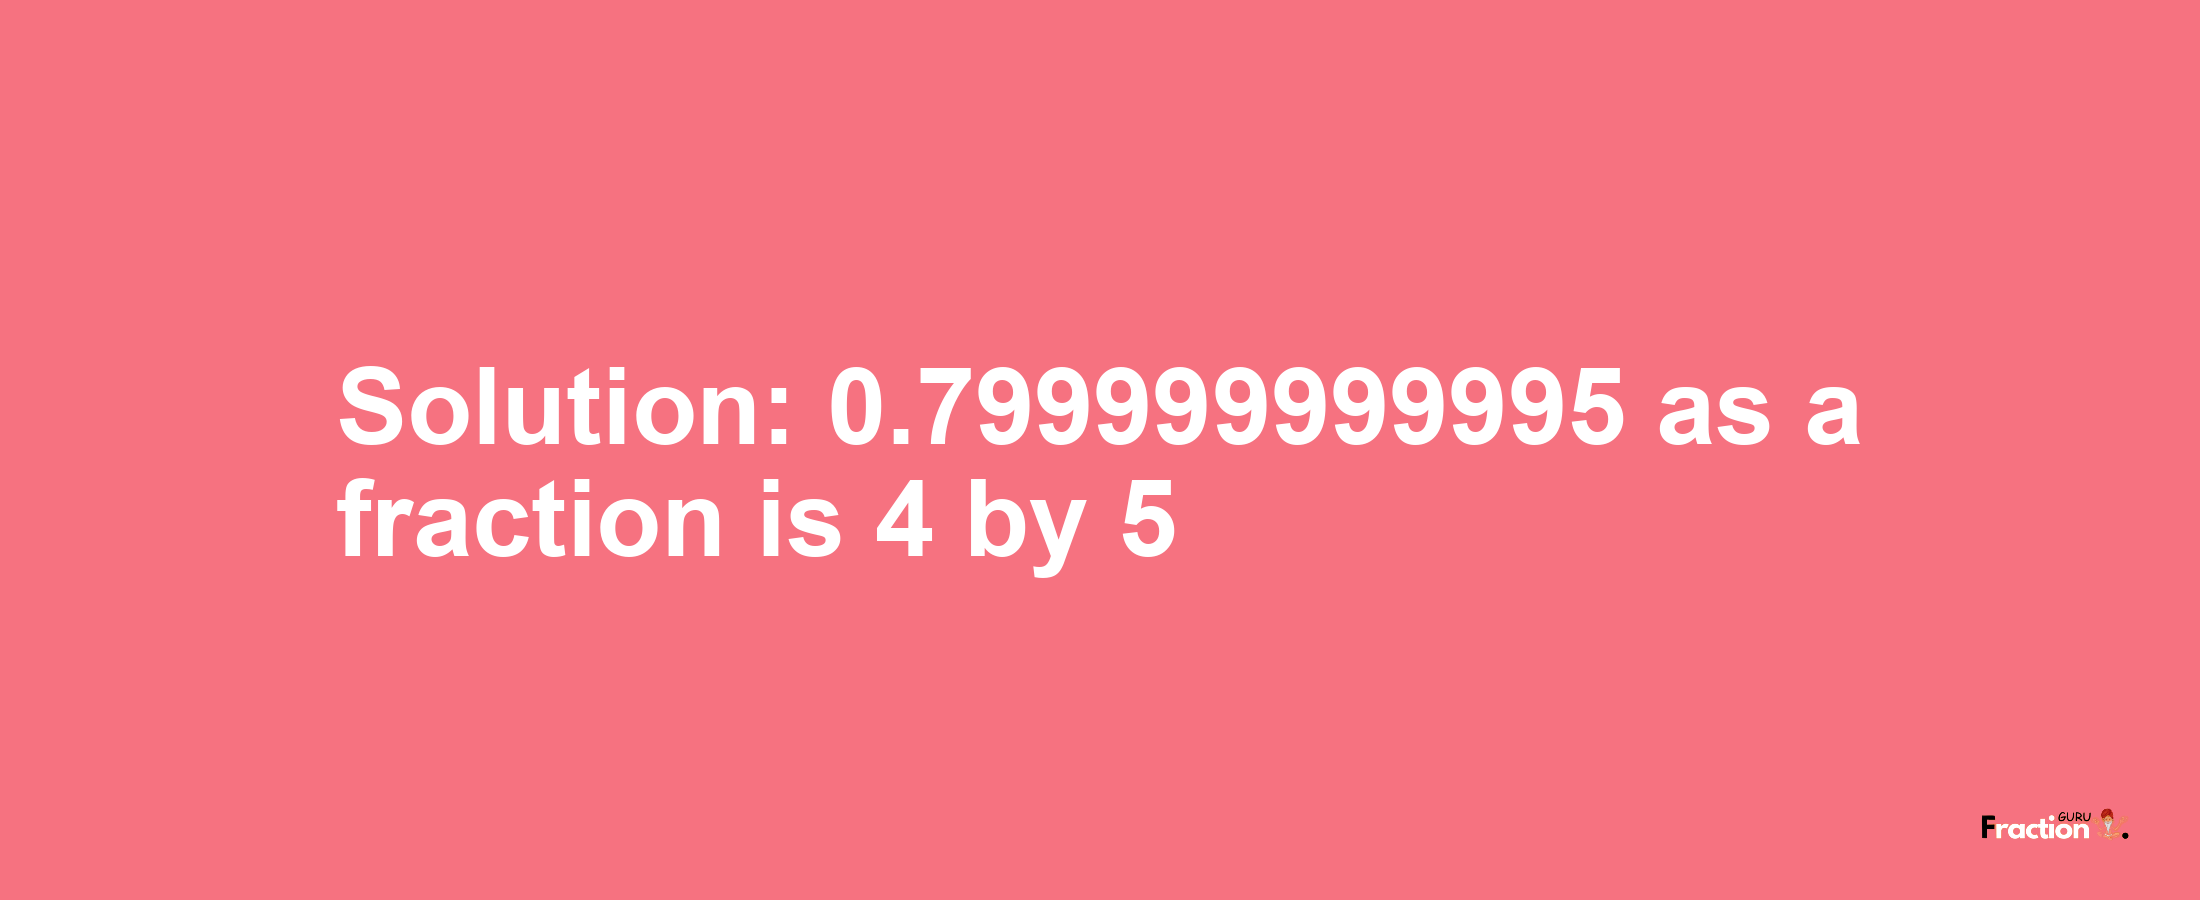 Solution:0.799999999995 as a fraction is 4/5